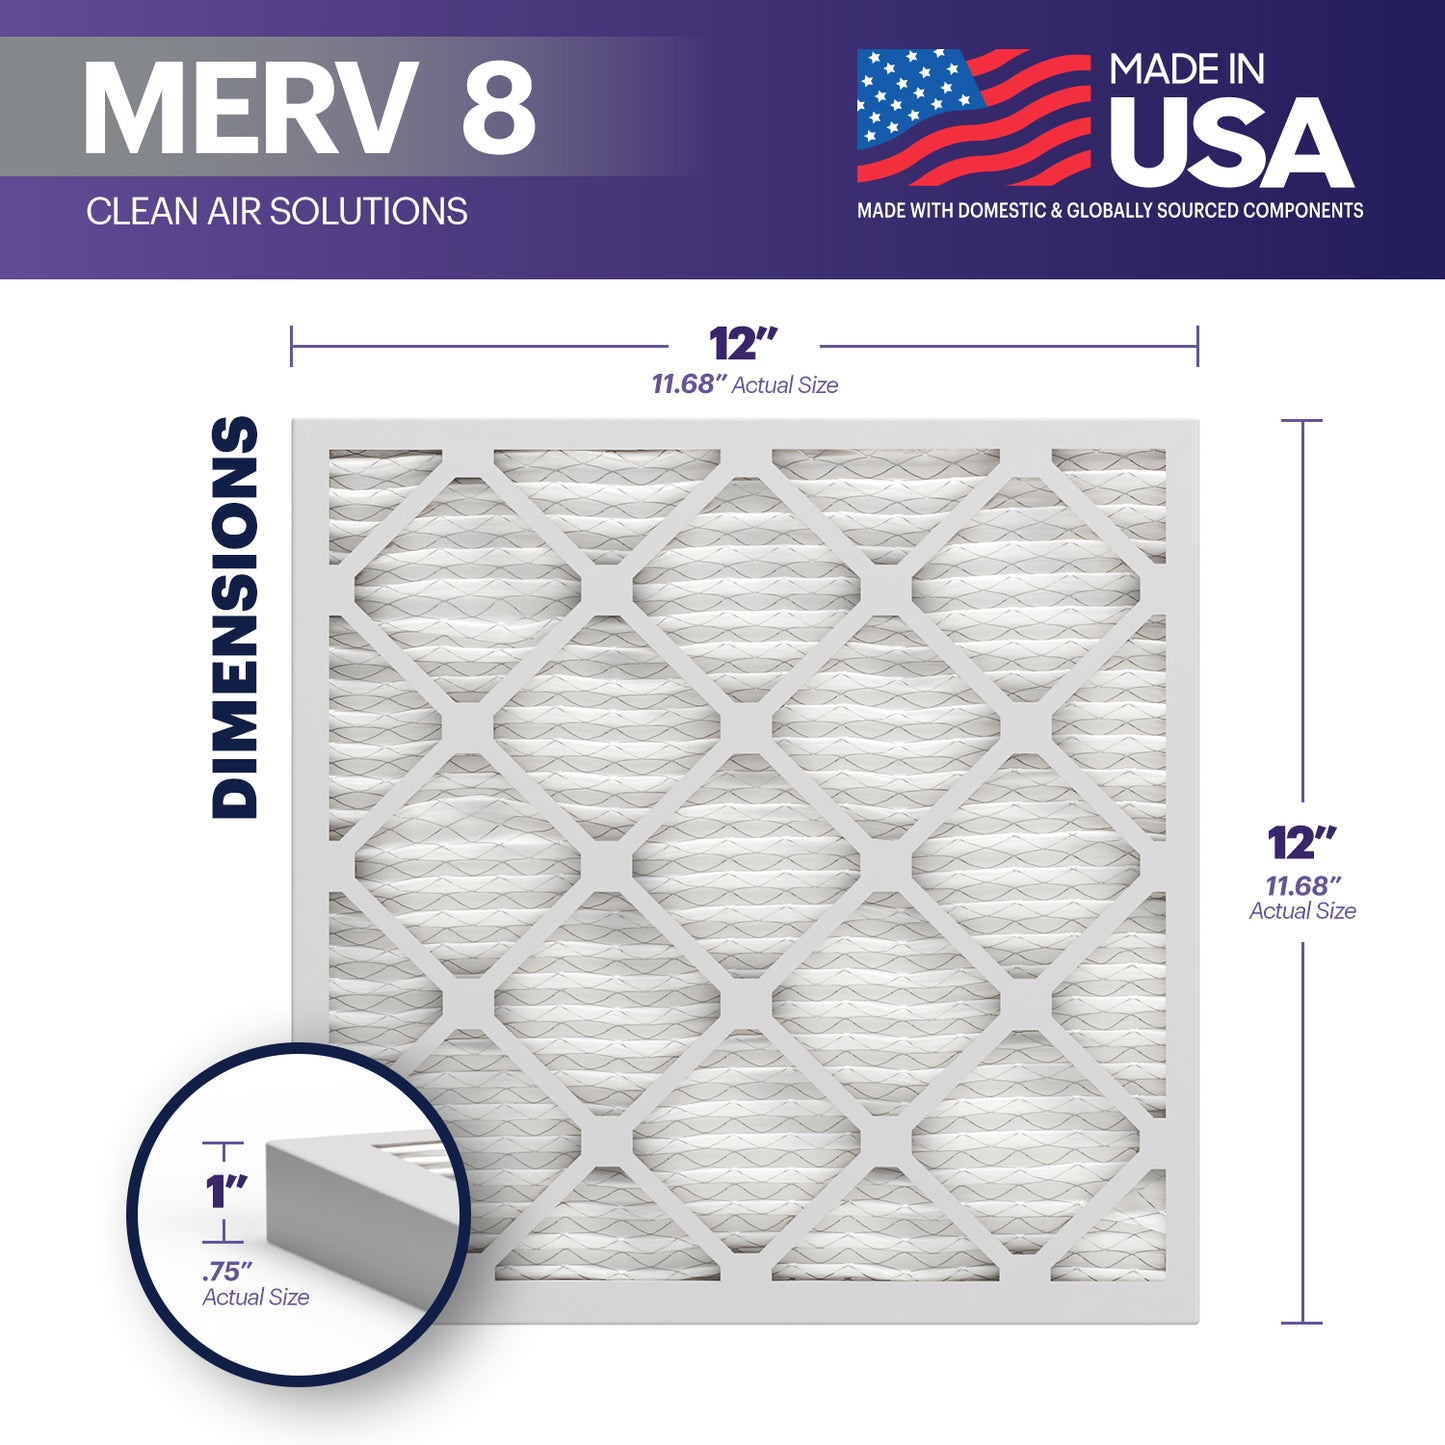 BNX TruFilter 12x12x1 MERV 8 Pleated Air Filter – Made in USA (6-Pack)